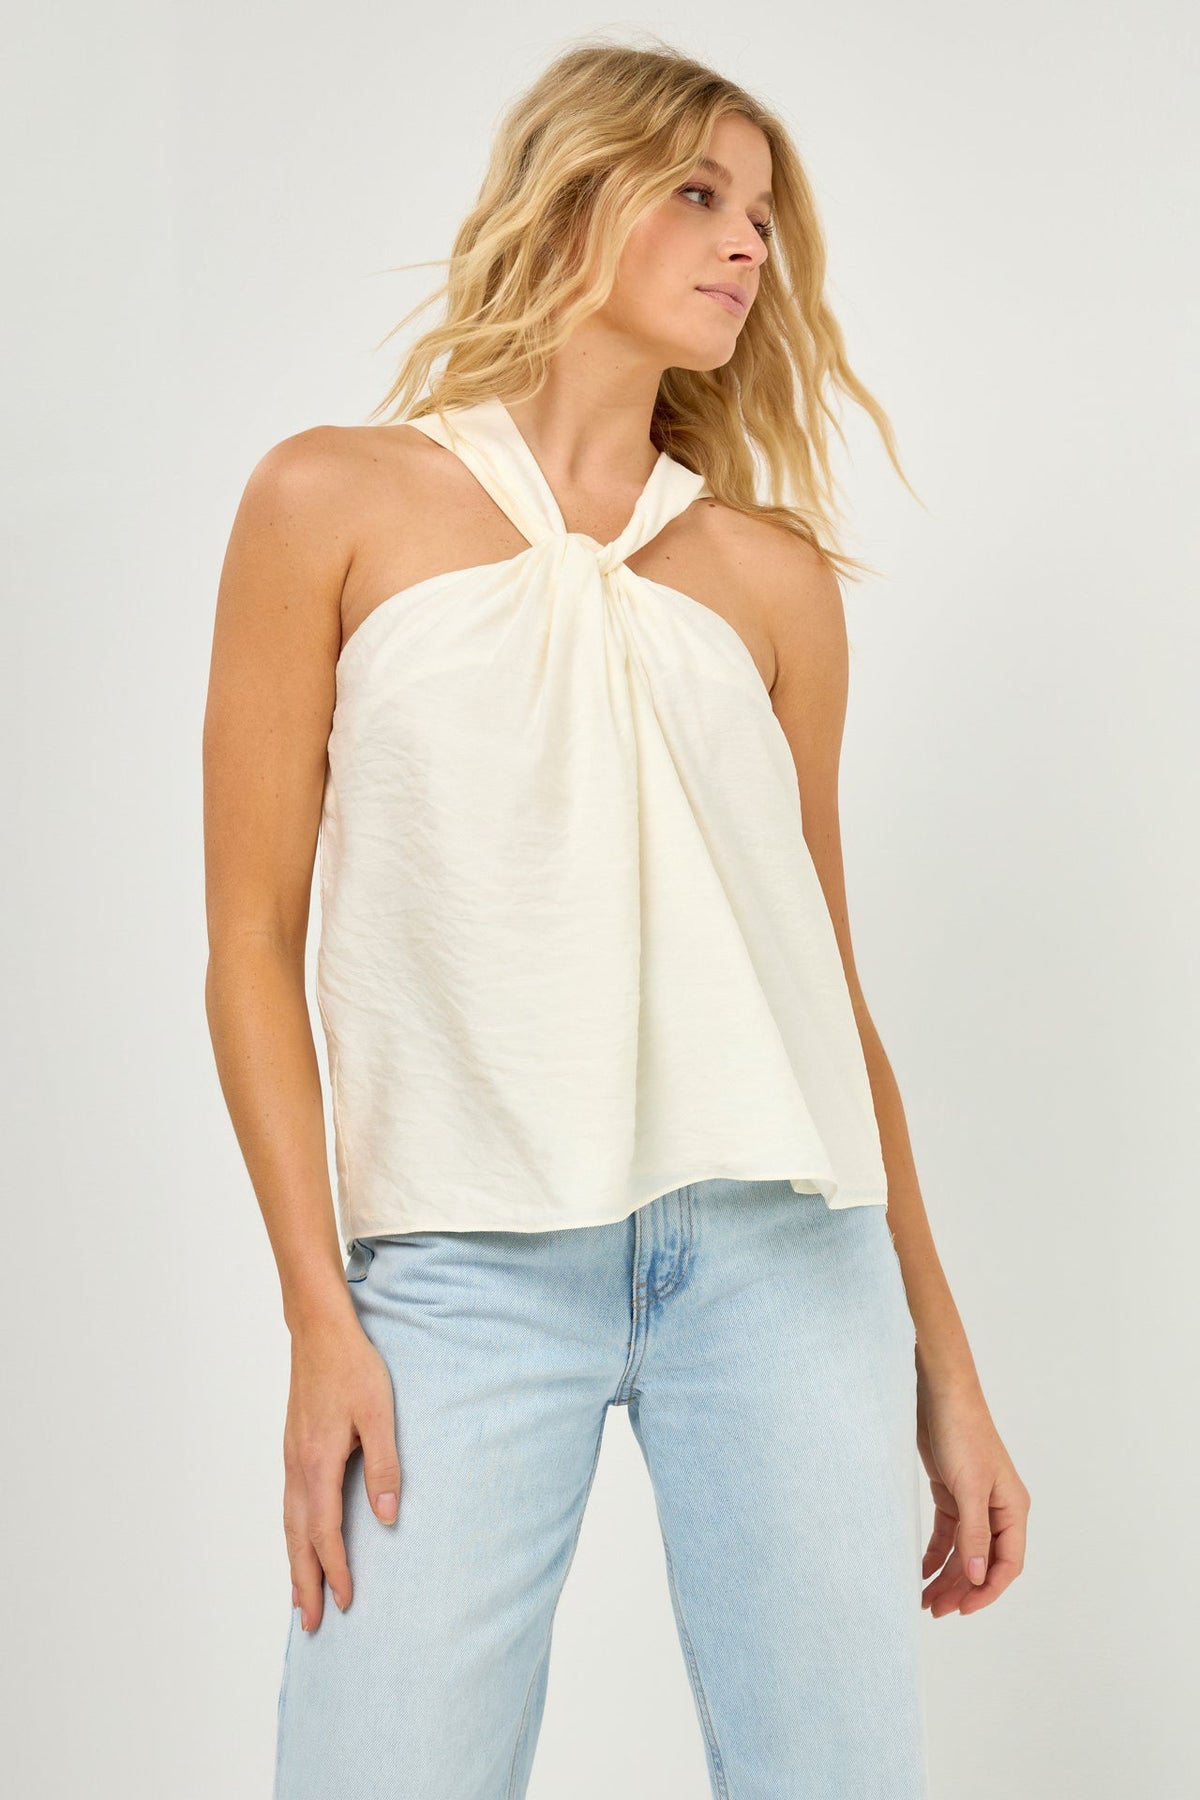 ENDLESS ROSE - Loop Halter Neck with Cross Back Detail - TOPS available at Objectrare